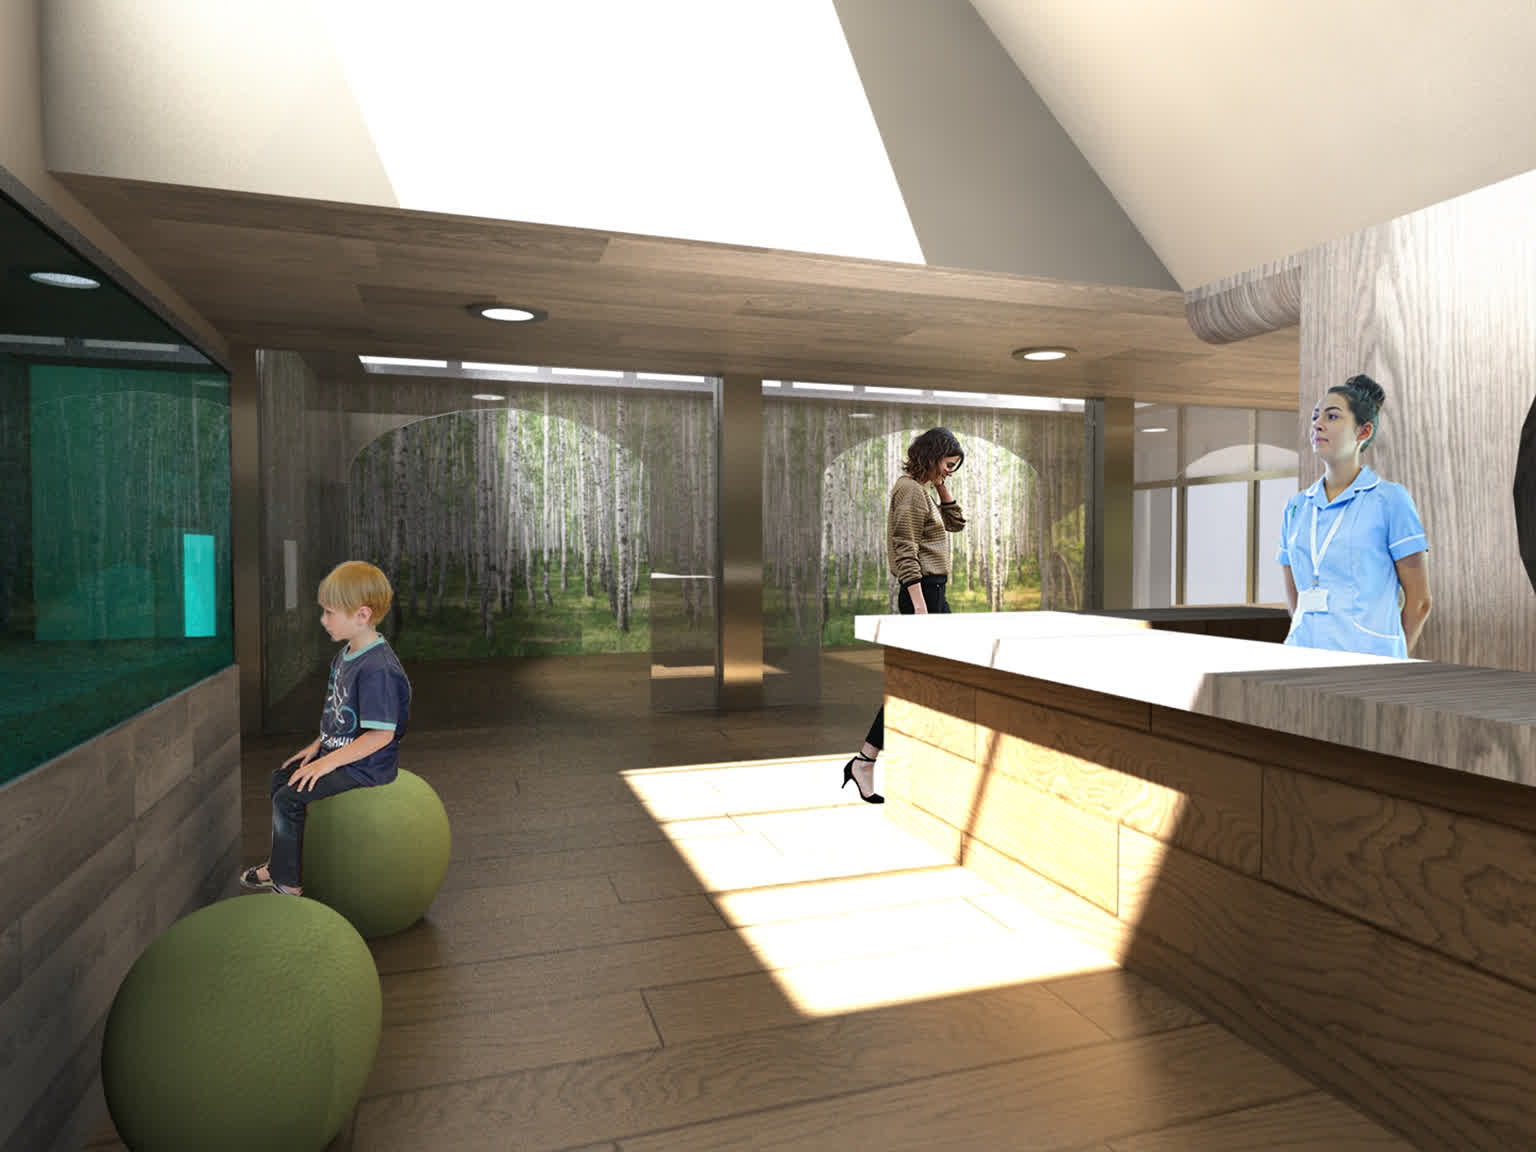 Thumbnail image: A rendered view of a children's hospital waiting room, with people using the space